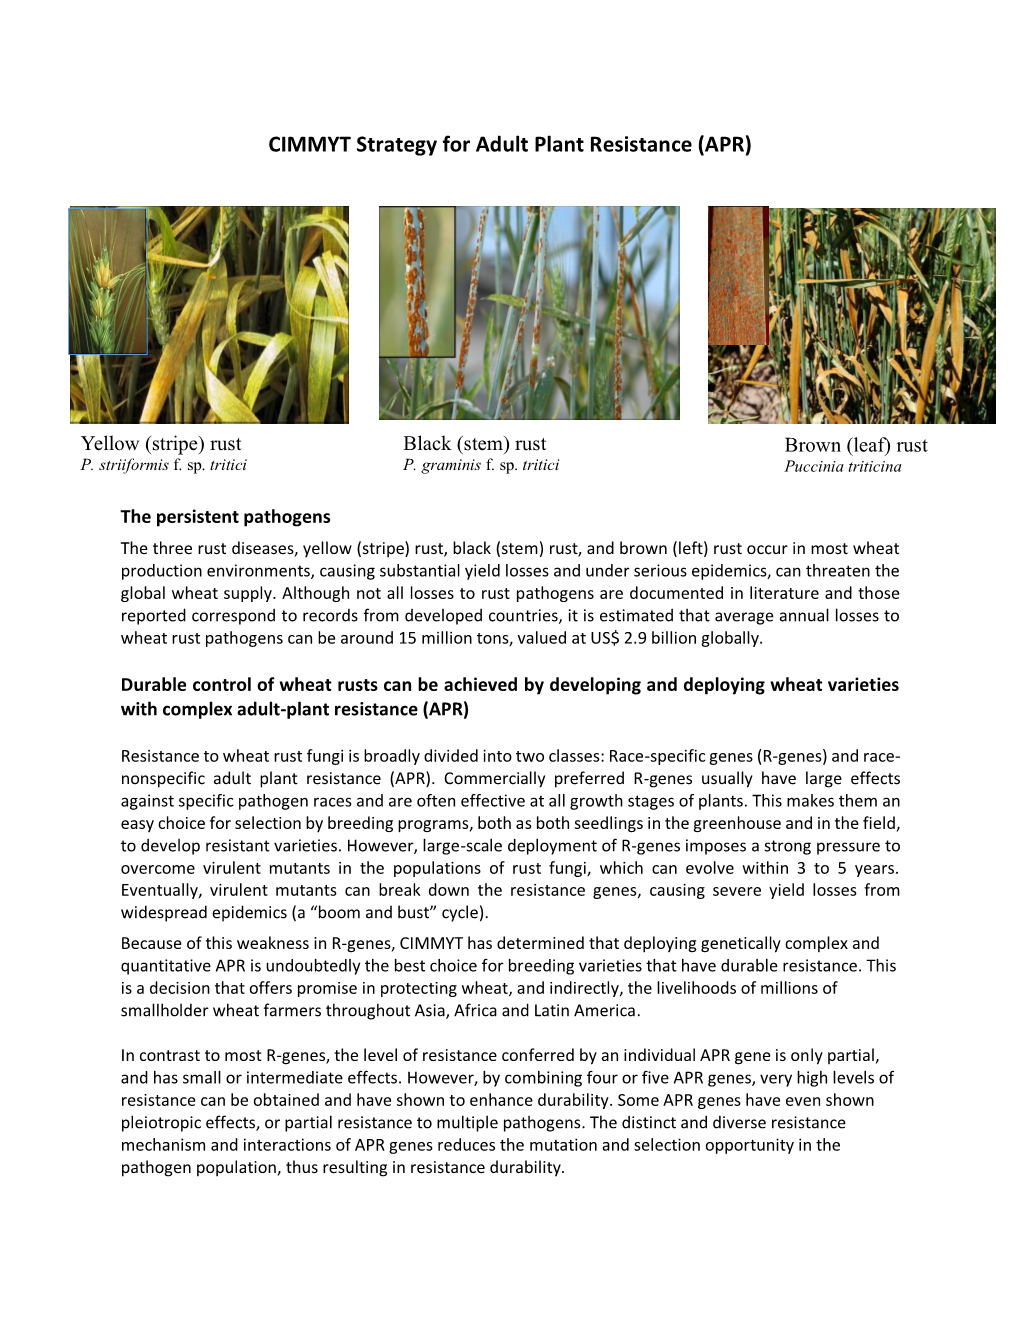 CIMMYT Strategy for Adult Plant Resistance (APR)